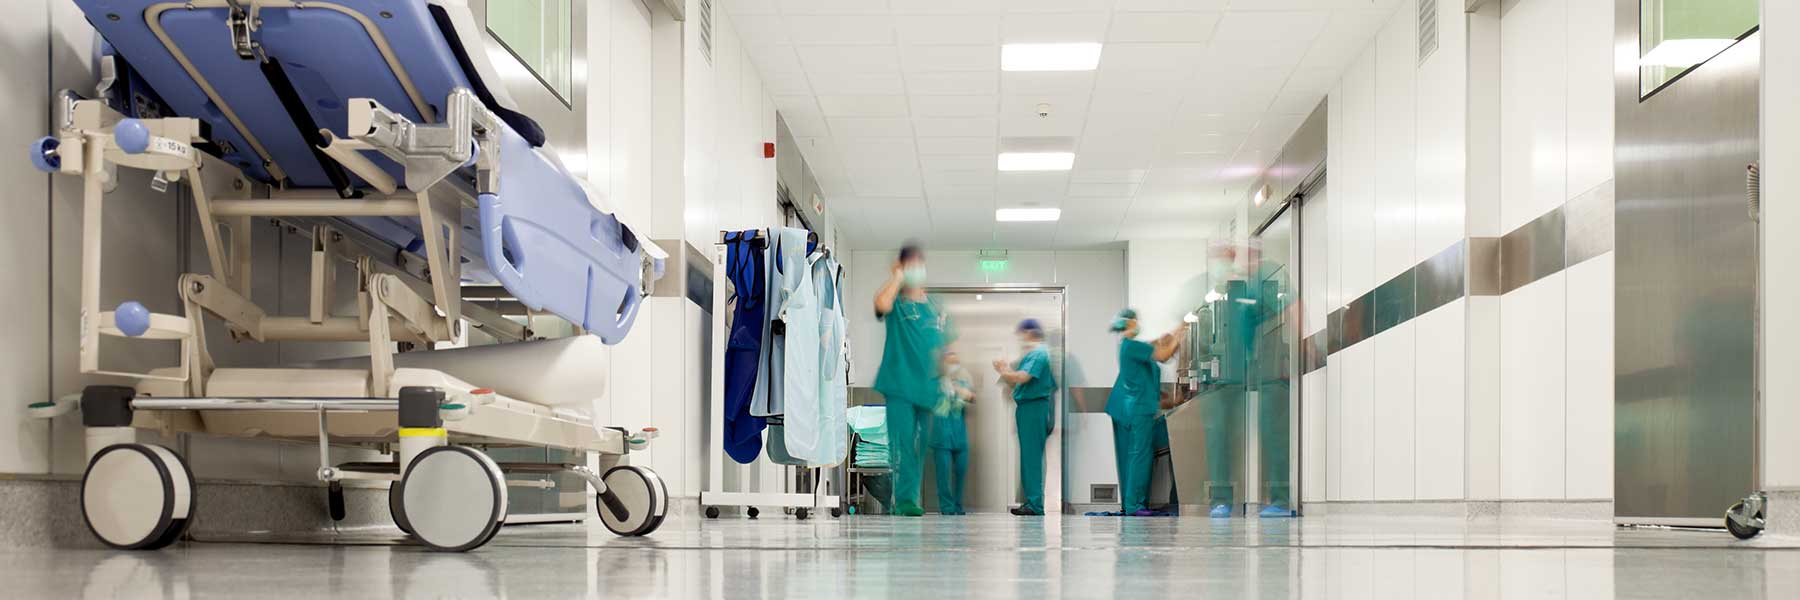 Hospitals Visit? Know Your Rights Here